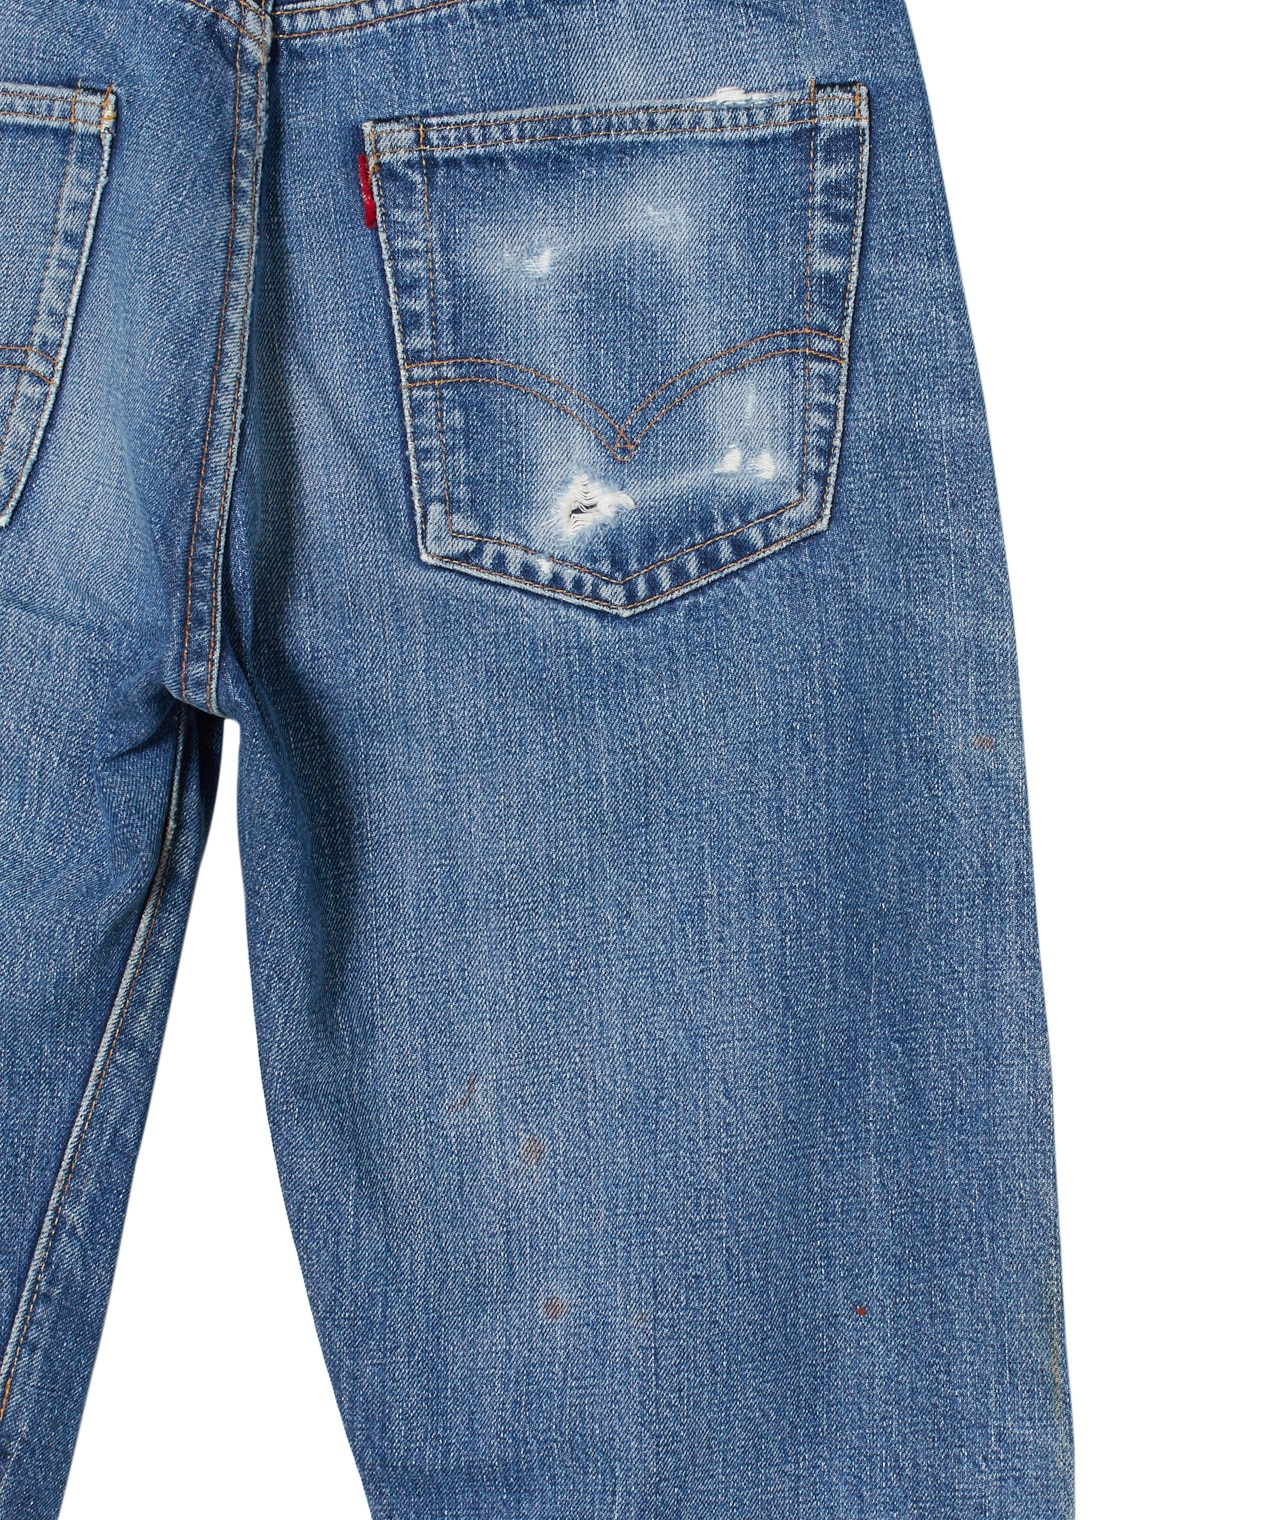 USED/LEVI'S 502 BIG E AS-IS 詳細画像 BLUE 5